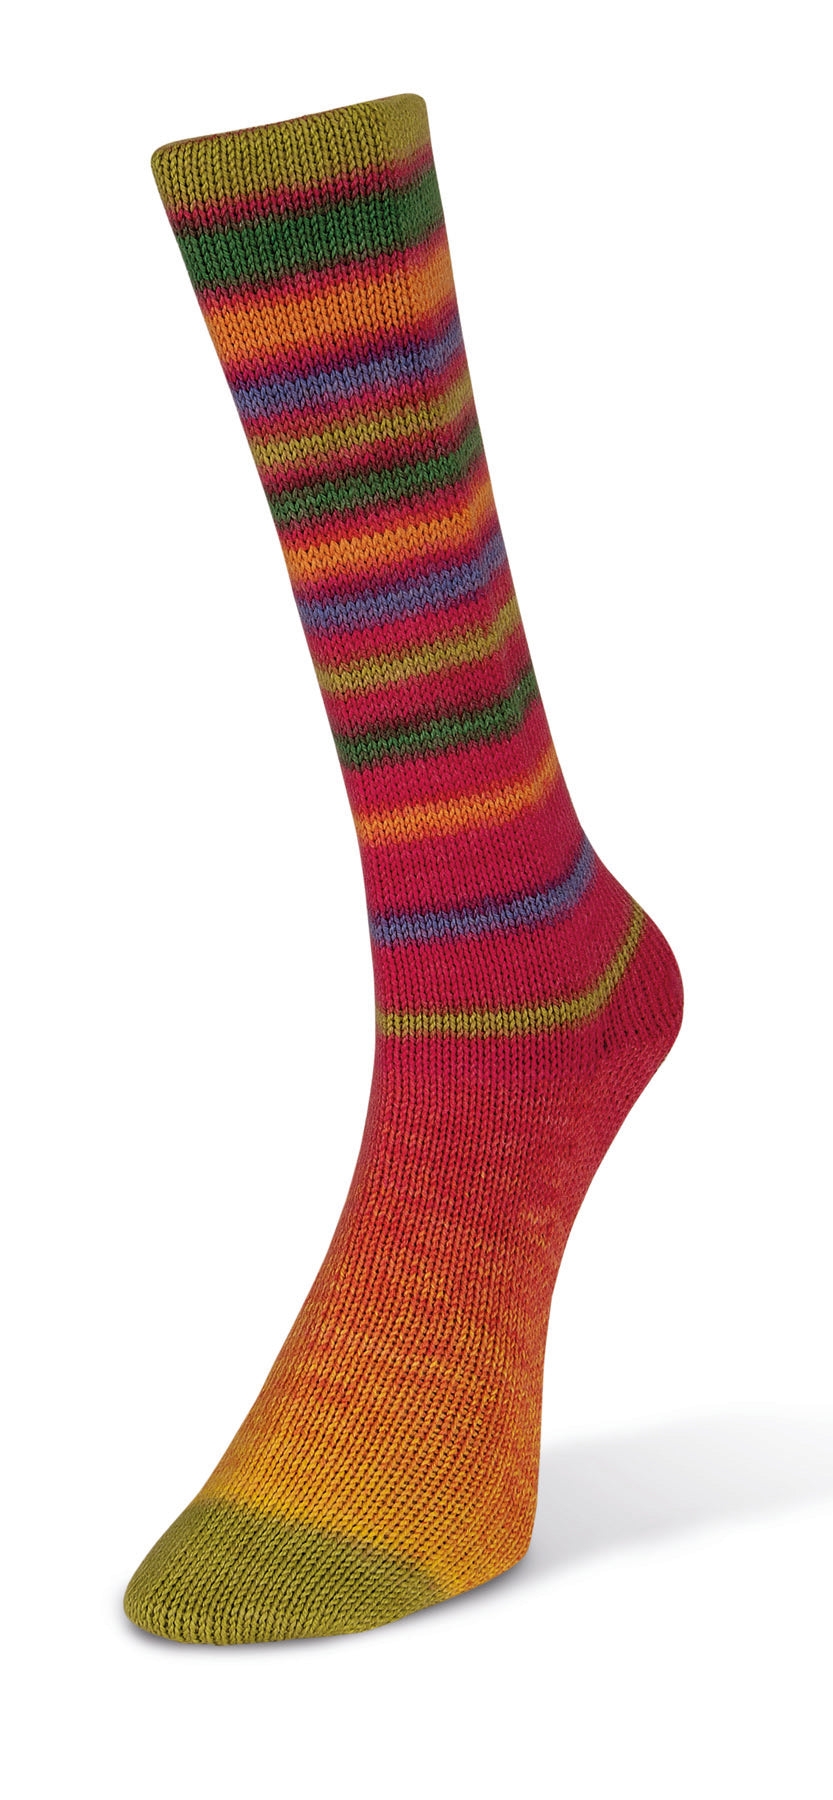 Laines de Nord Inifinity Sock color red green blue